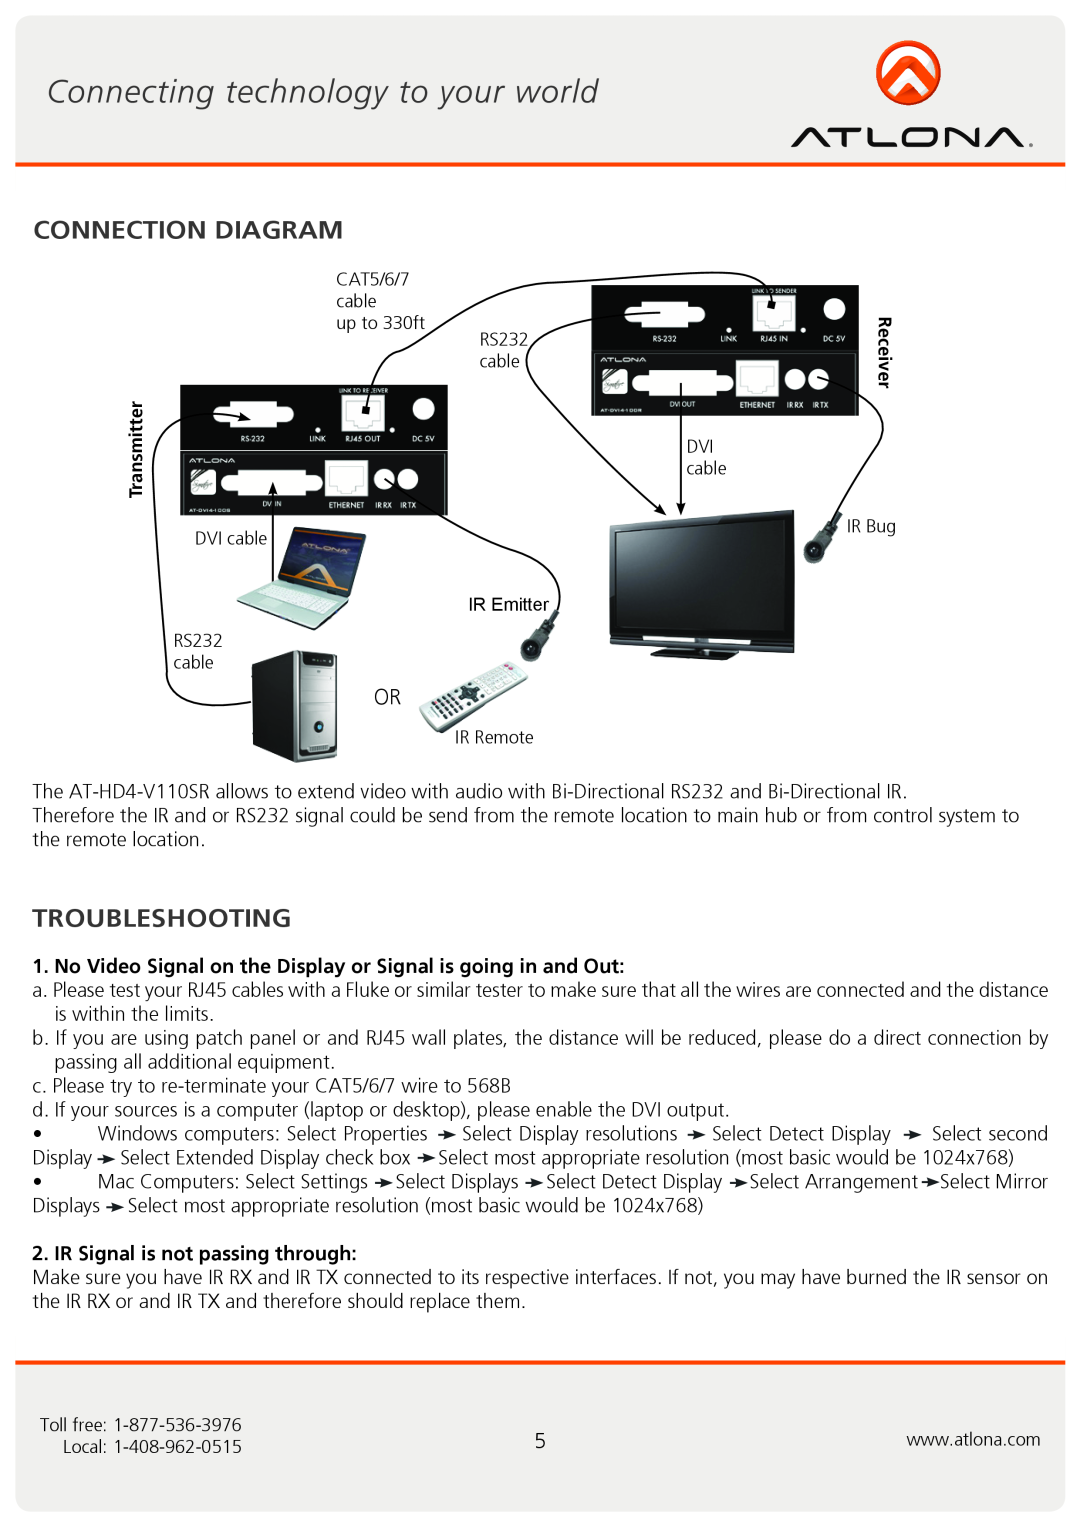 Atlona AT-DVI4-100SR Connection Diagram, Troubleshooting, No Video Signal on the Display or Signal is going in and Out 